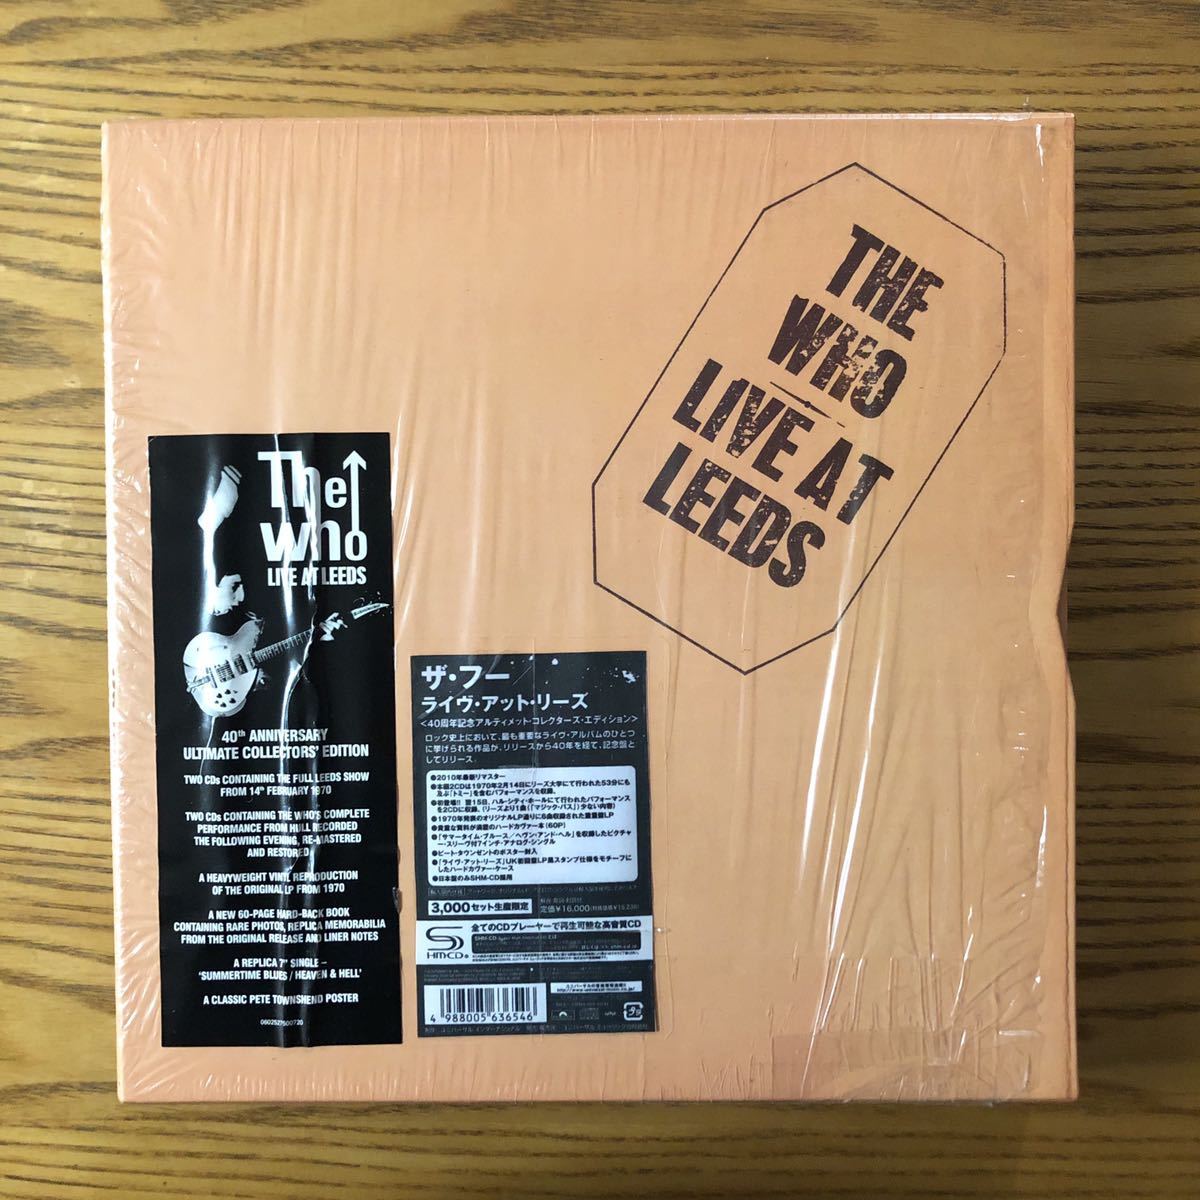 THE WHO/LIVE AT LEEDS 40TH ANNIVERSARY ULTIMATE COLLECTOR'S EDITION[輸入盤:4CD+1LP+1EP+大判ポスター+ハードカバーBOOK..付属品完備!]